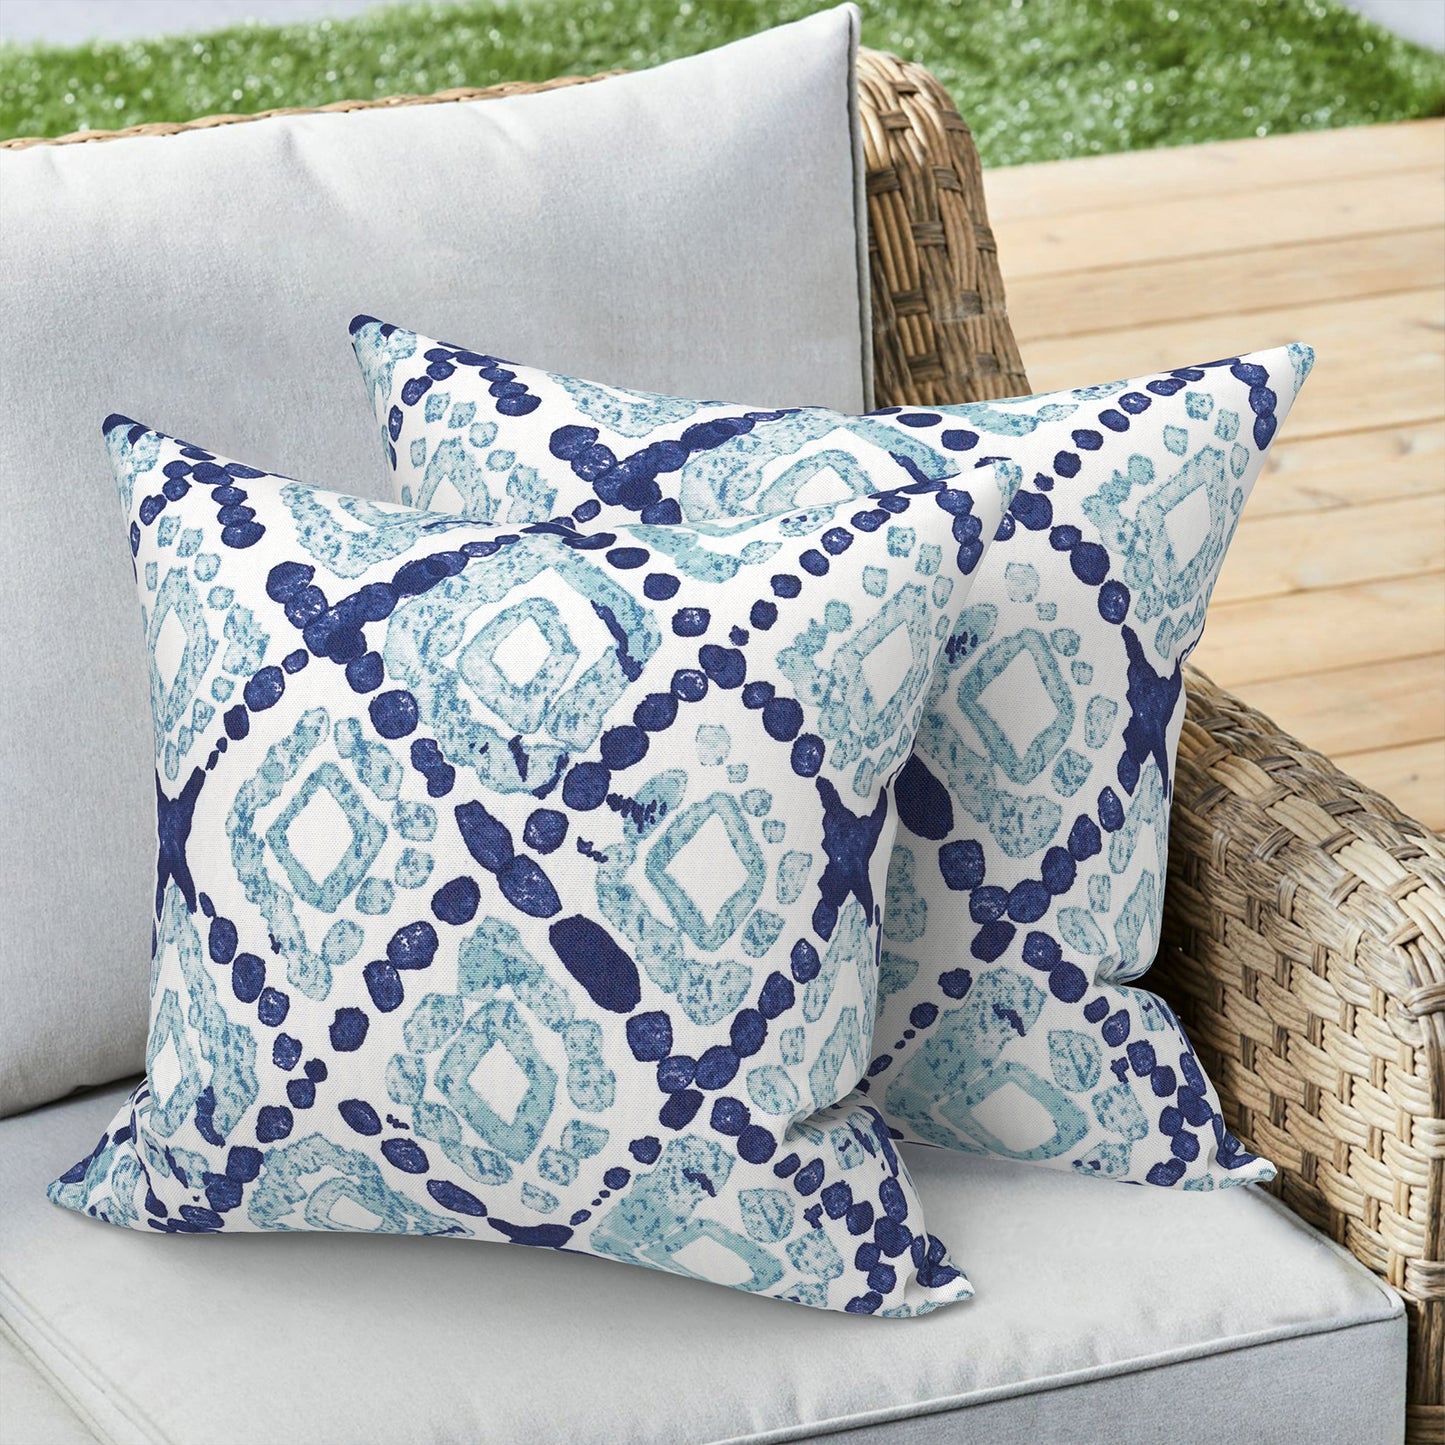 Melody Elephant Outdoor Throw Pillows 16x16 Inch, water Repellent patio pillows with Inners set of 2, outdoor pillows for patio furniture home garden, Boho Geometry Blue